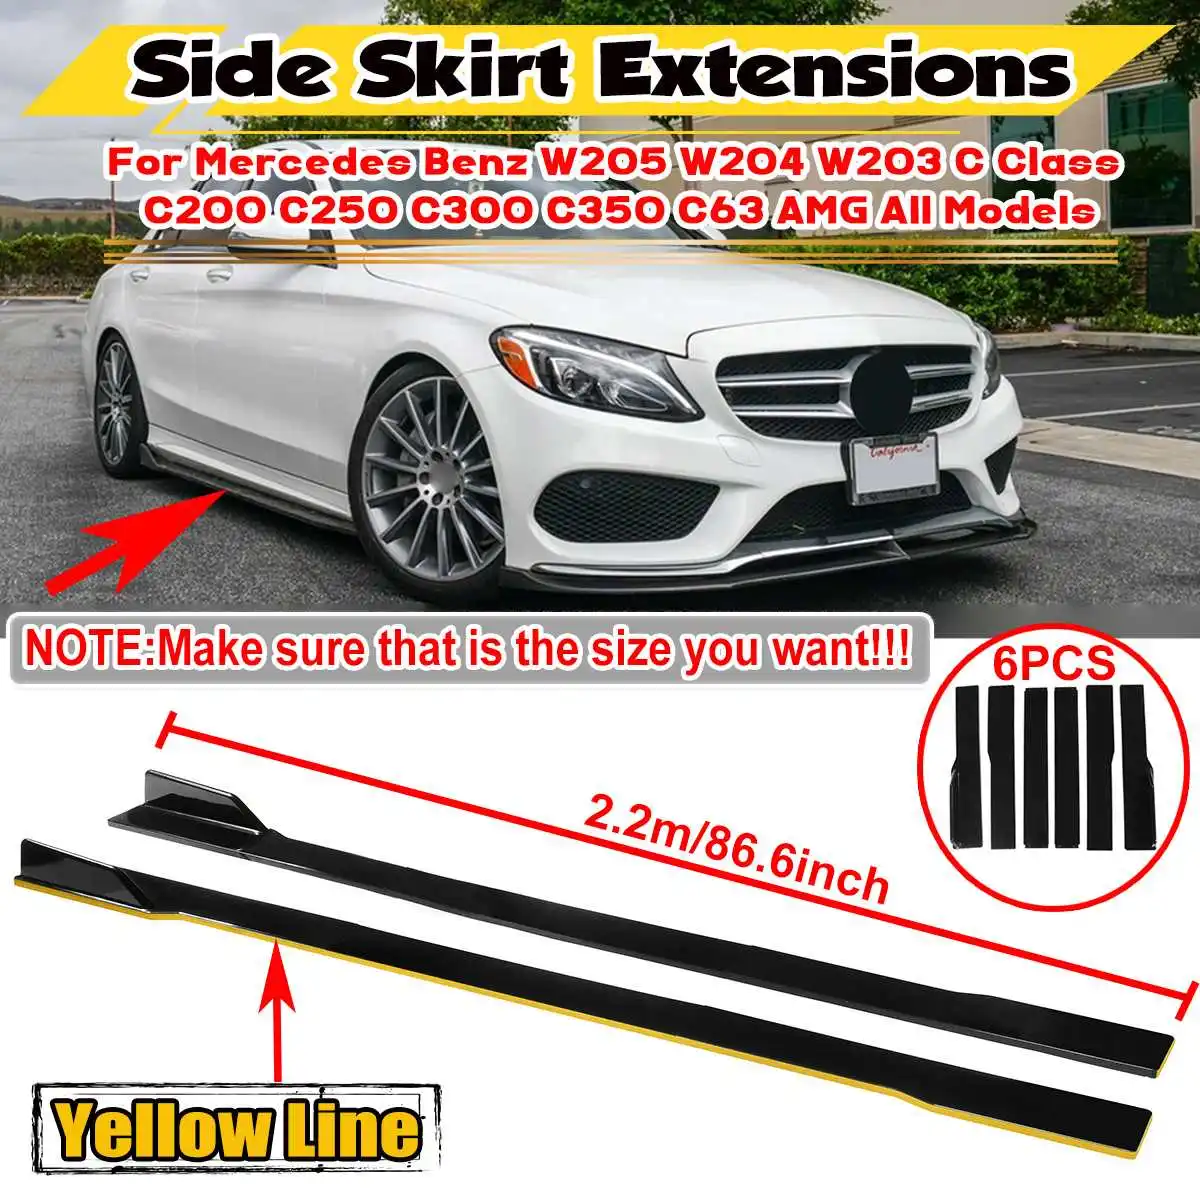 New 2.2m Car Side Skirt Extensions Universal Lip Splitters Lip For Benz W205 W204 W203 W211 W212 W213 W117 C117 W176 CLA A Class